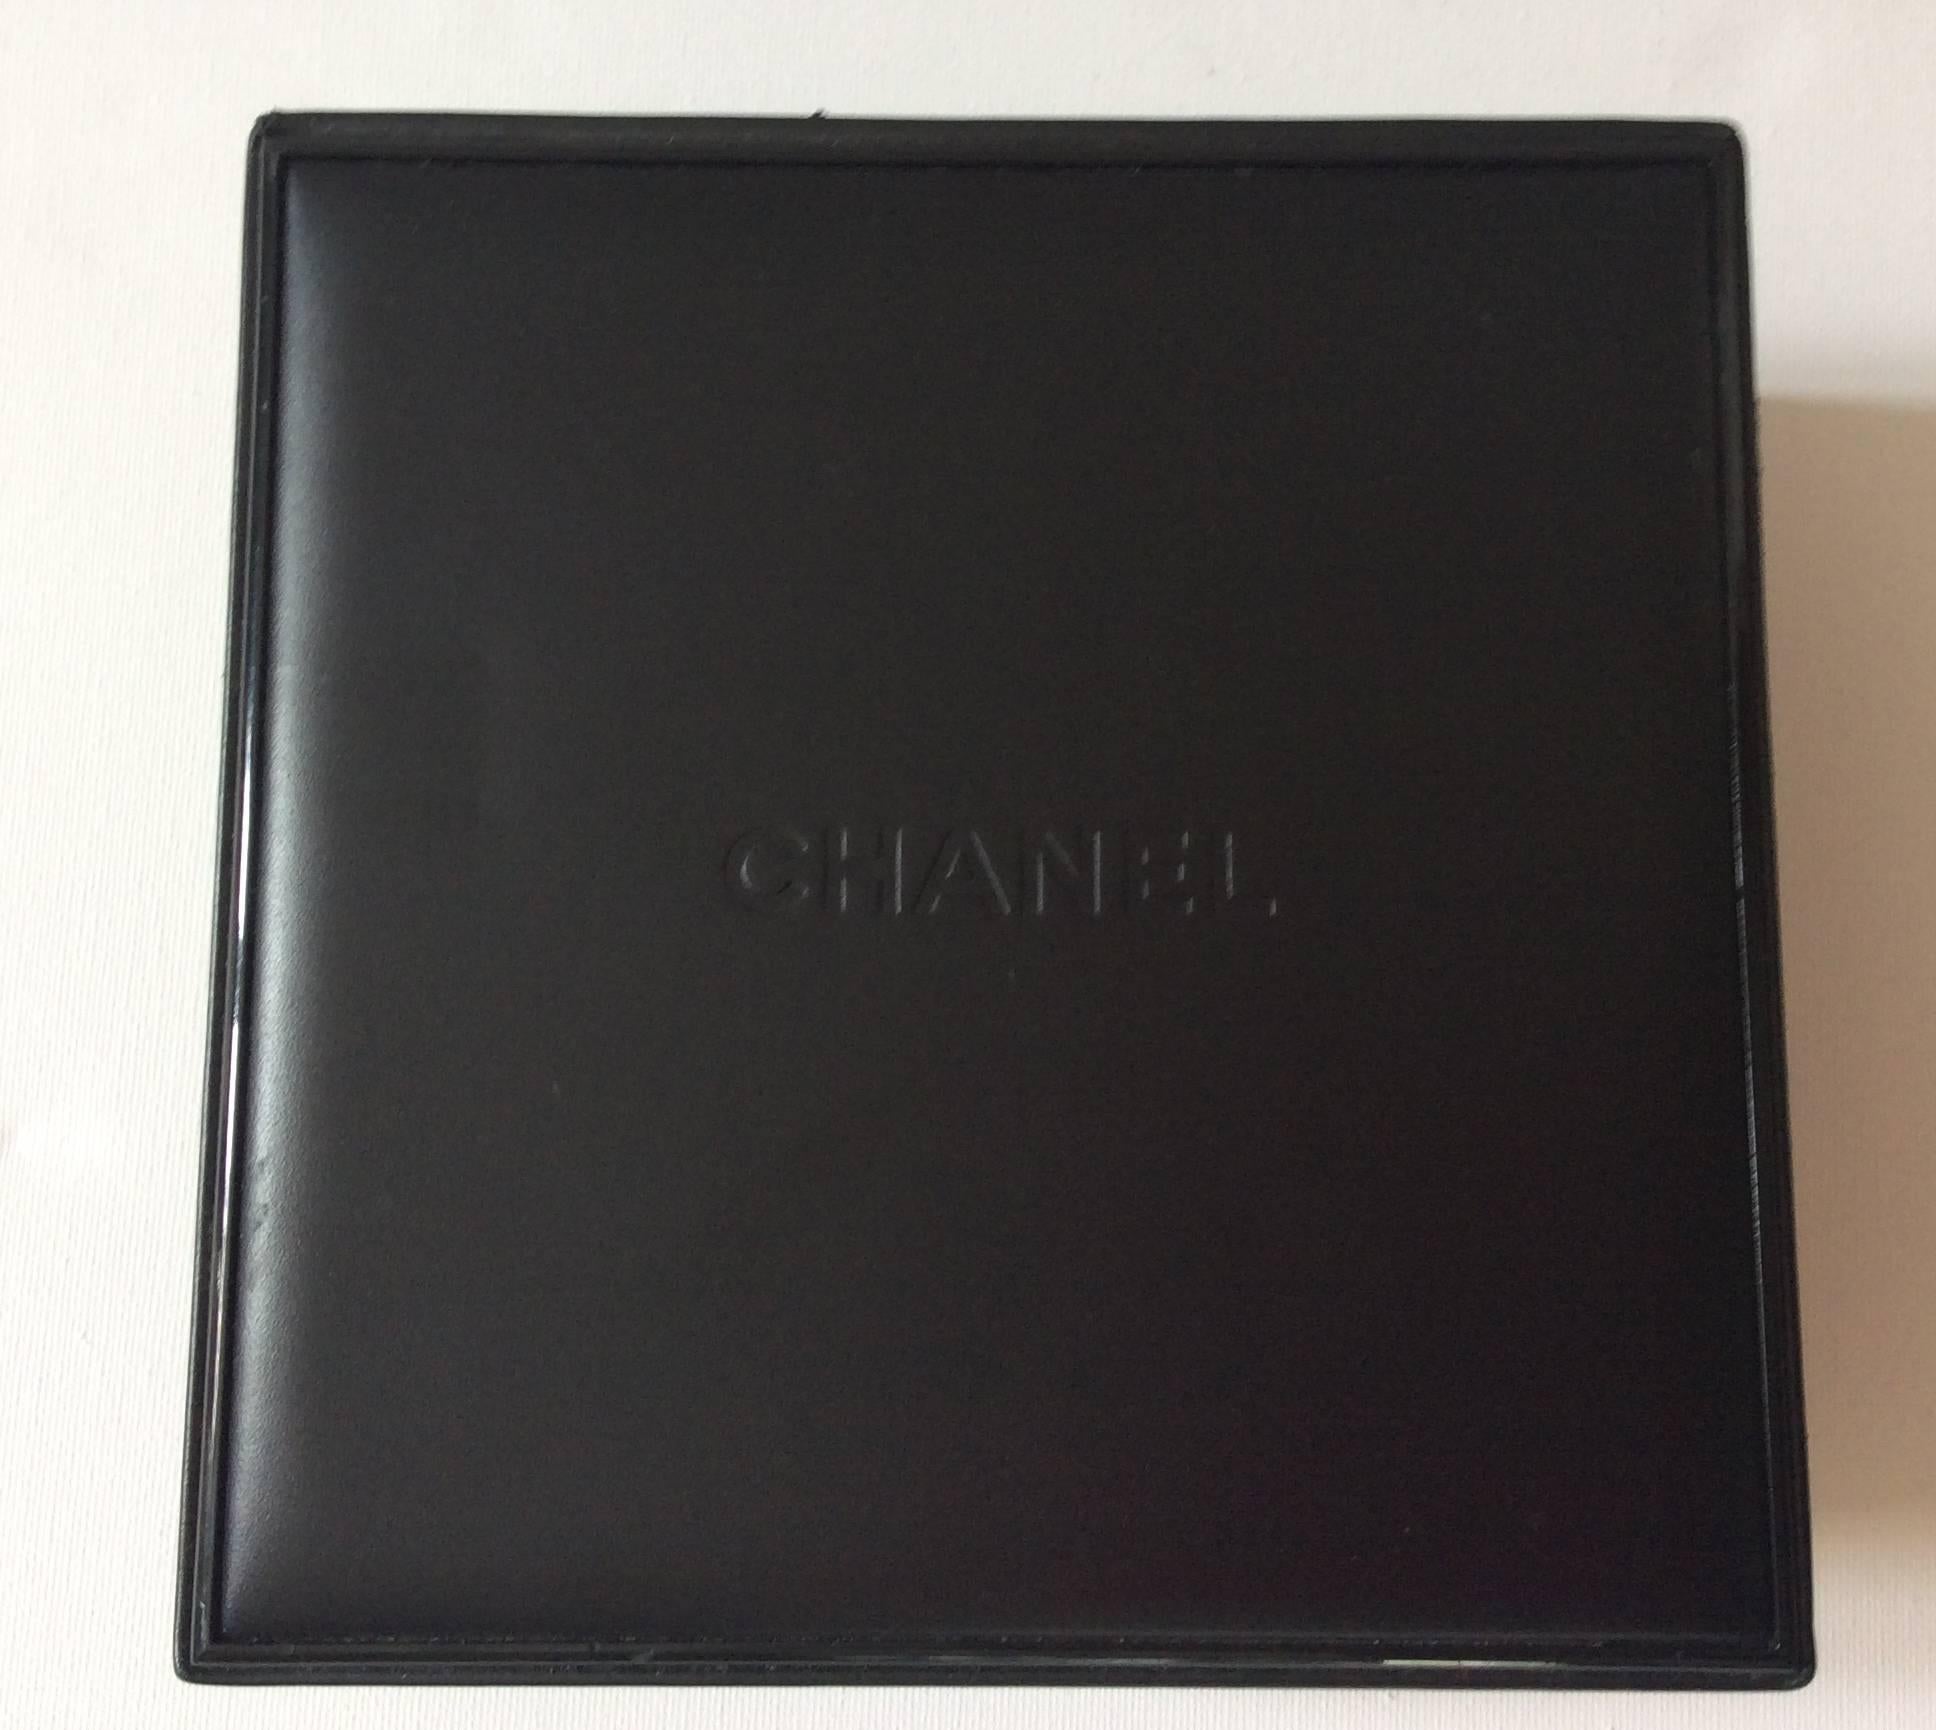 This Chanel fine jewelry box is black and is embossed with the Chanel name on the top of the box. It is an extremely uncommon box to find. The box is square and is lined entirely in suede leather. The inside of the box is also embossed with the